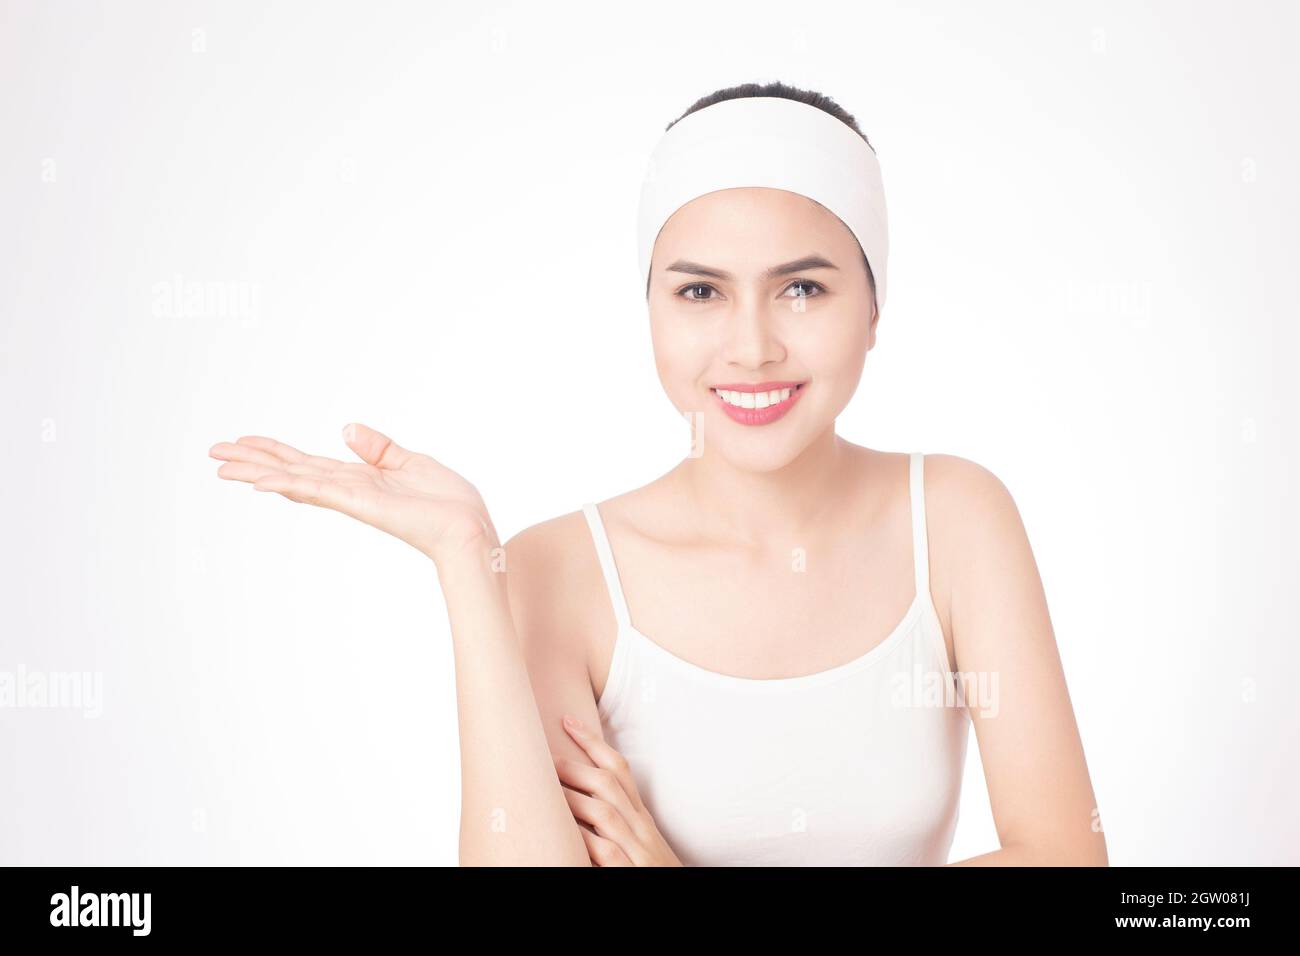 Portrait Of Smiling Young Woman Gesturing Over White Background Stock Photo